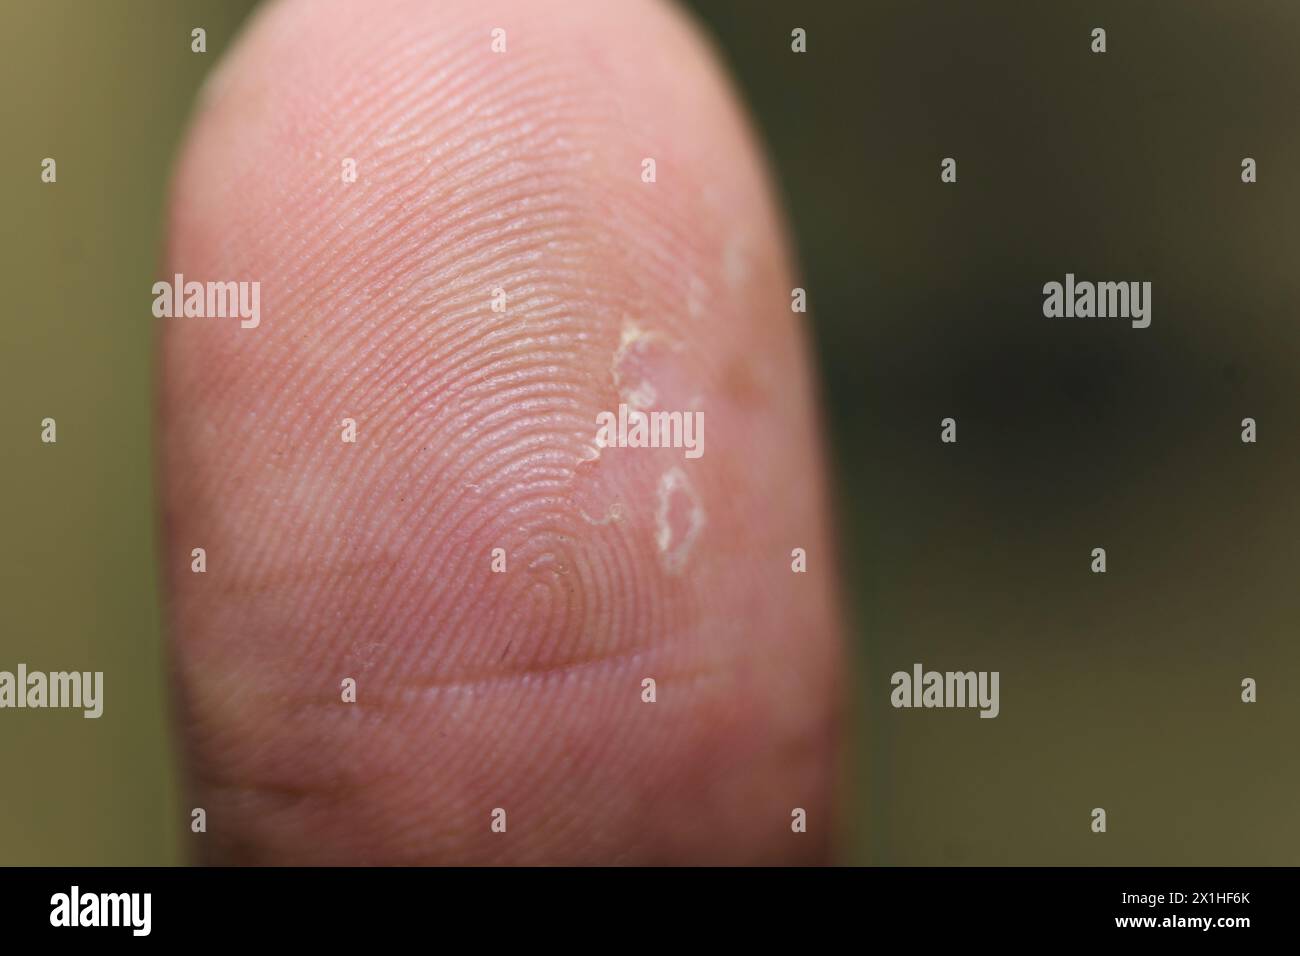 A magnified image of a fingertip showing red, inflamed, and scaly skin, possibly caused by psoriasis or eczema. Stock Photo